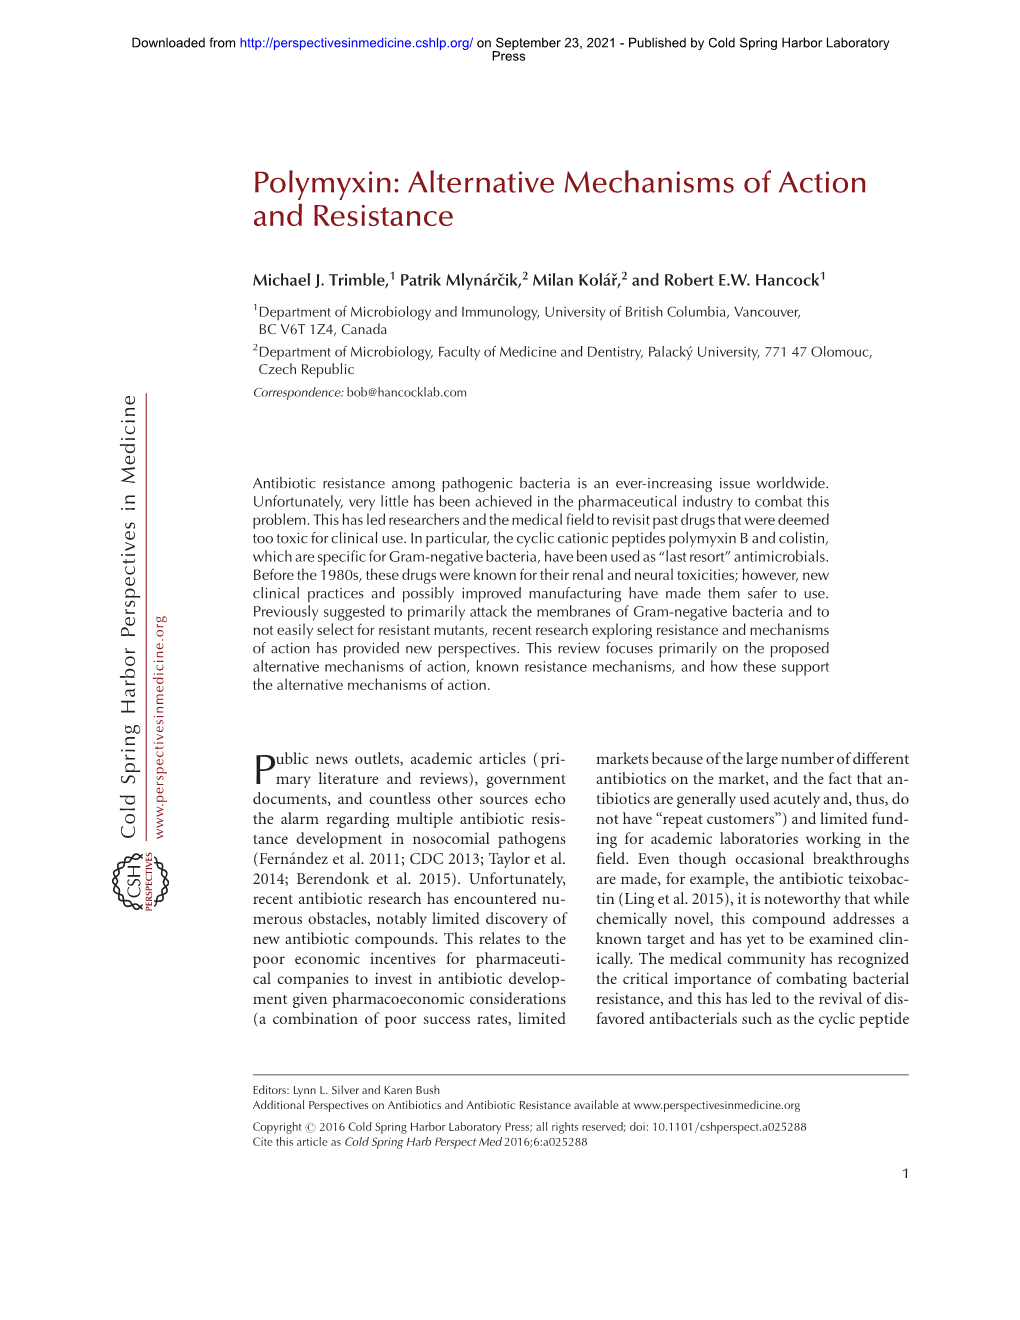 Polymyxin: Alternative Mechanisms of Action and Resistance